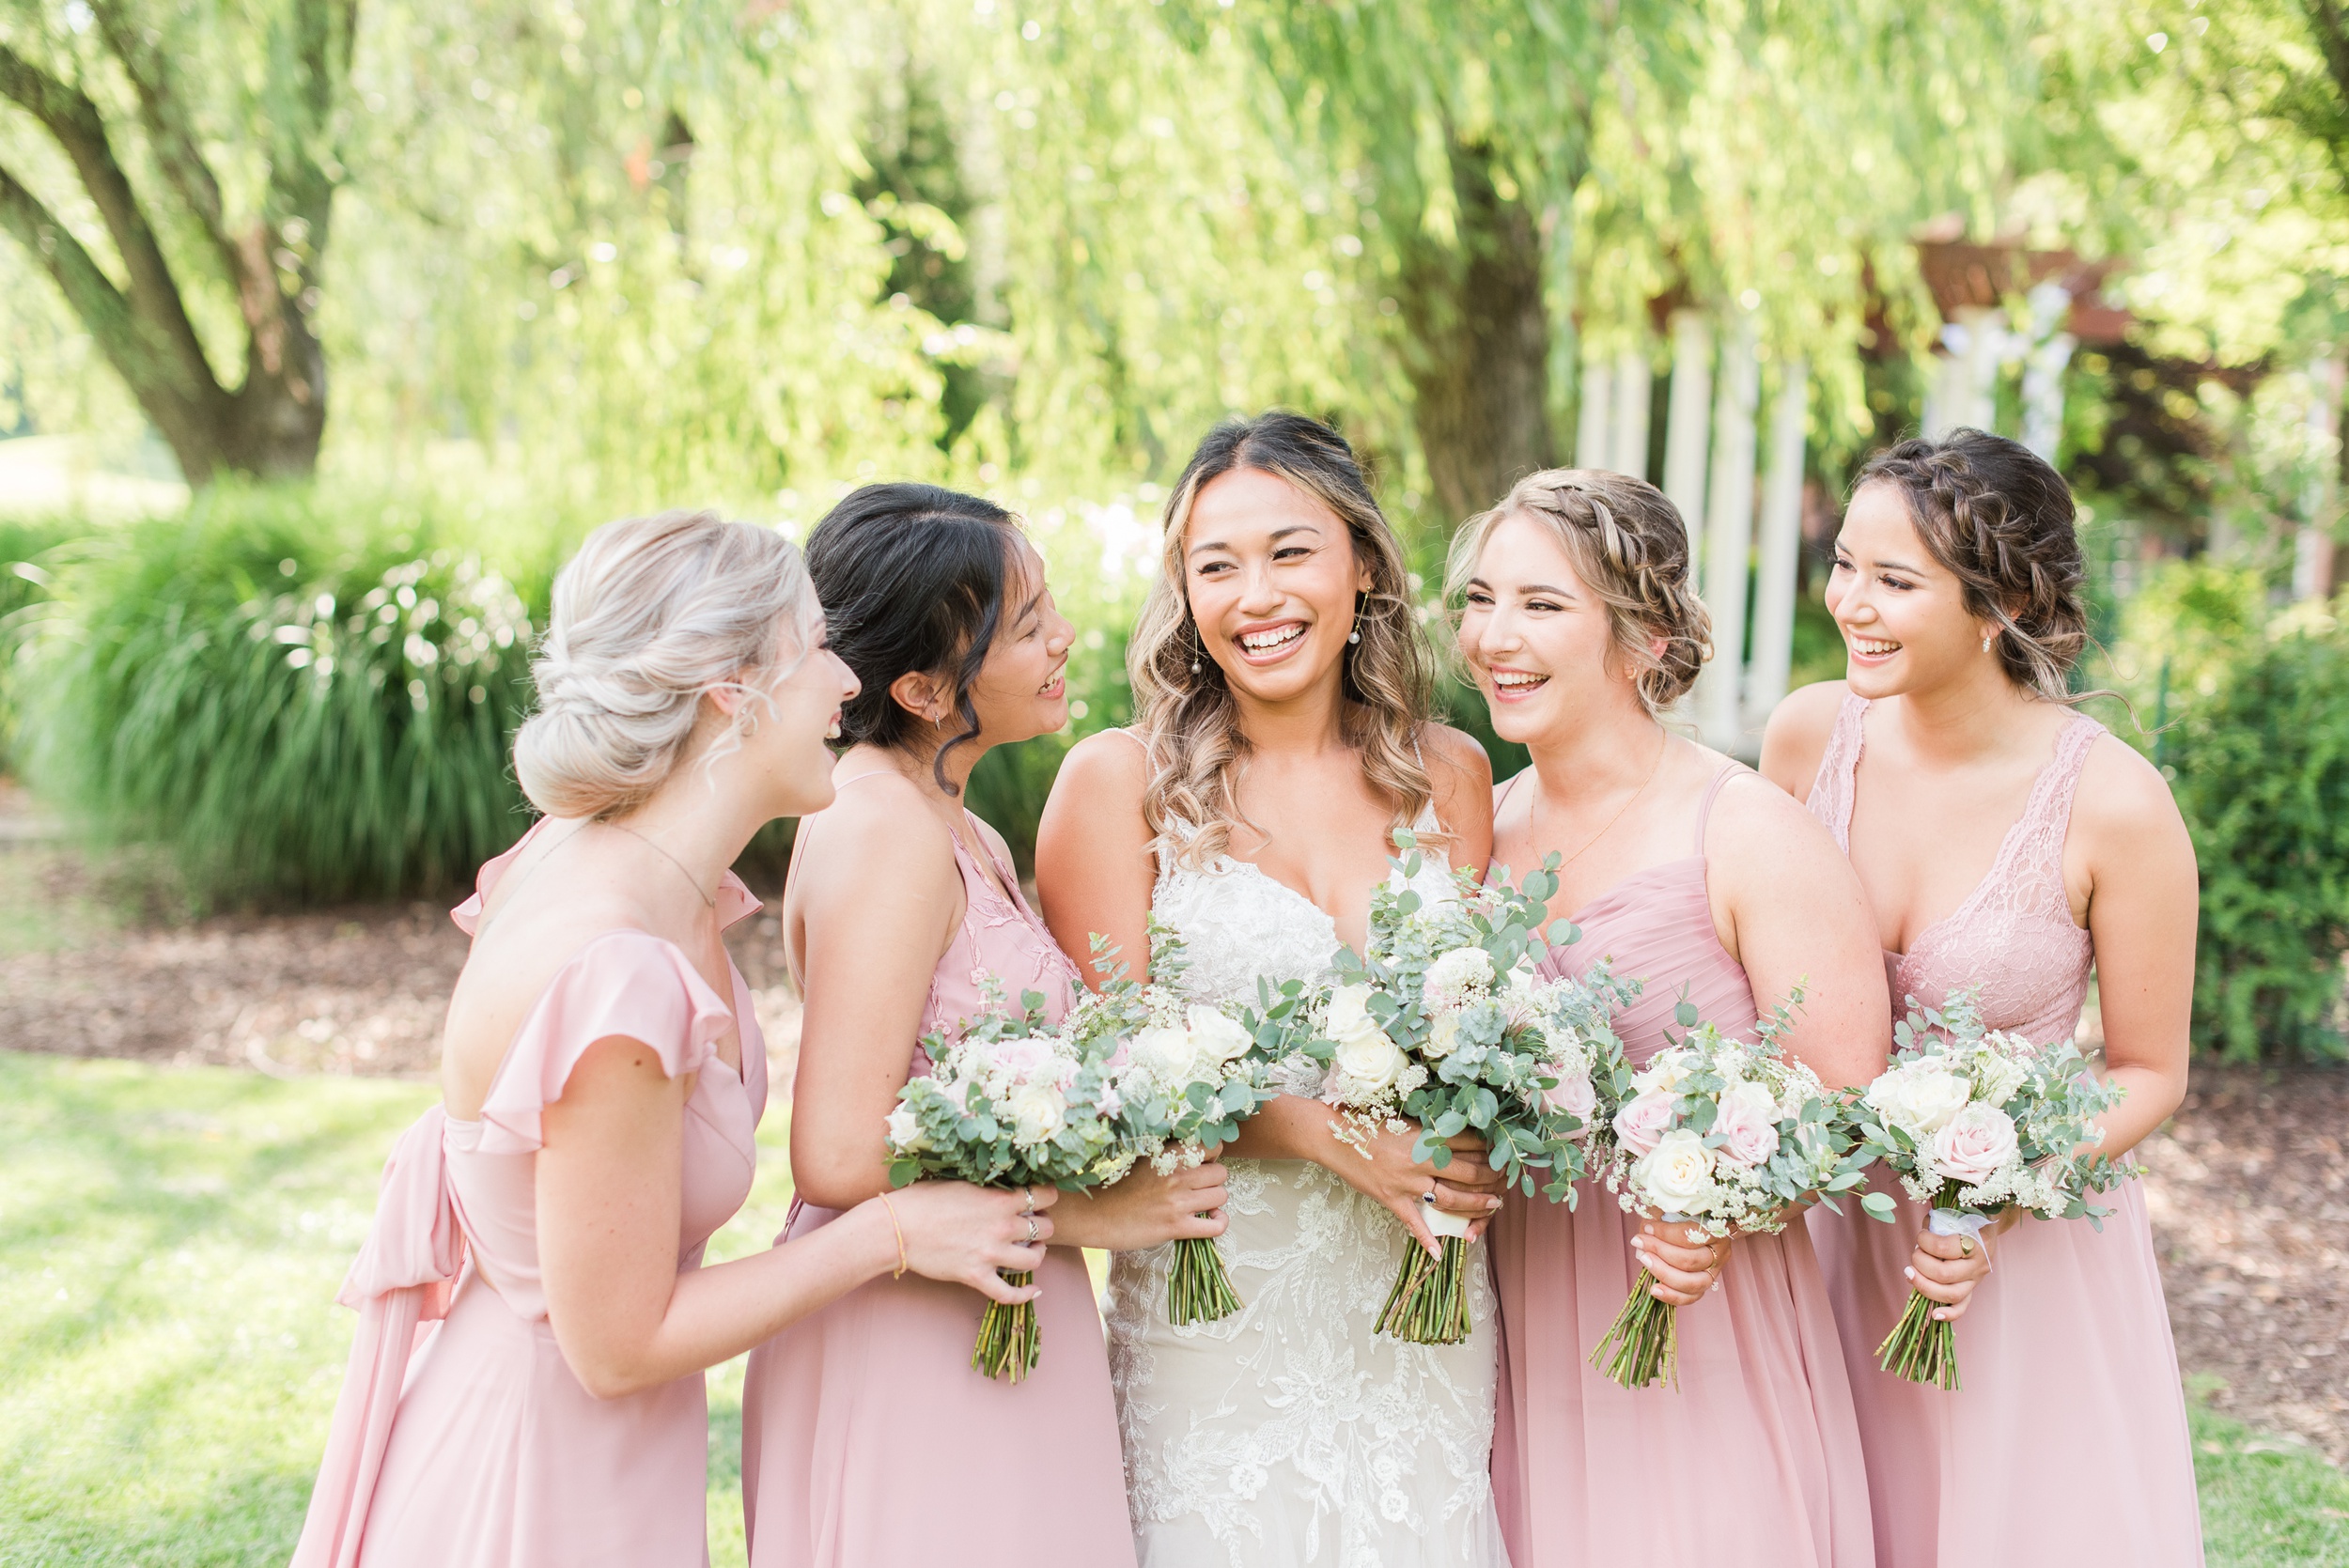 A bride laughs while standing in a garden with her bridesmaids in pink dresses